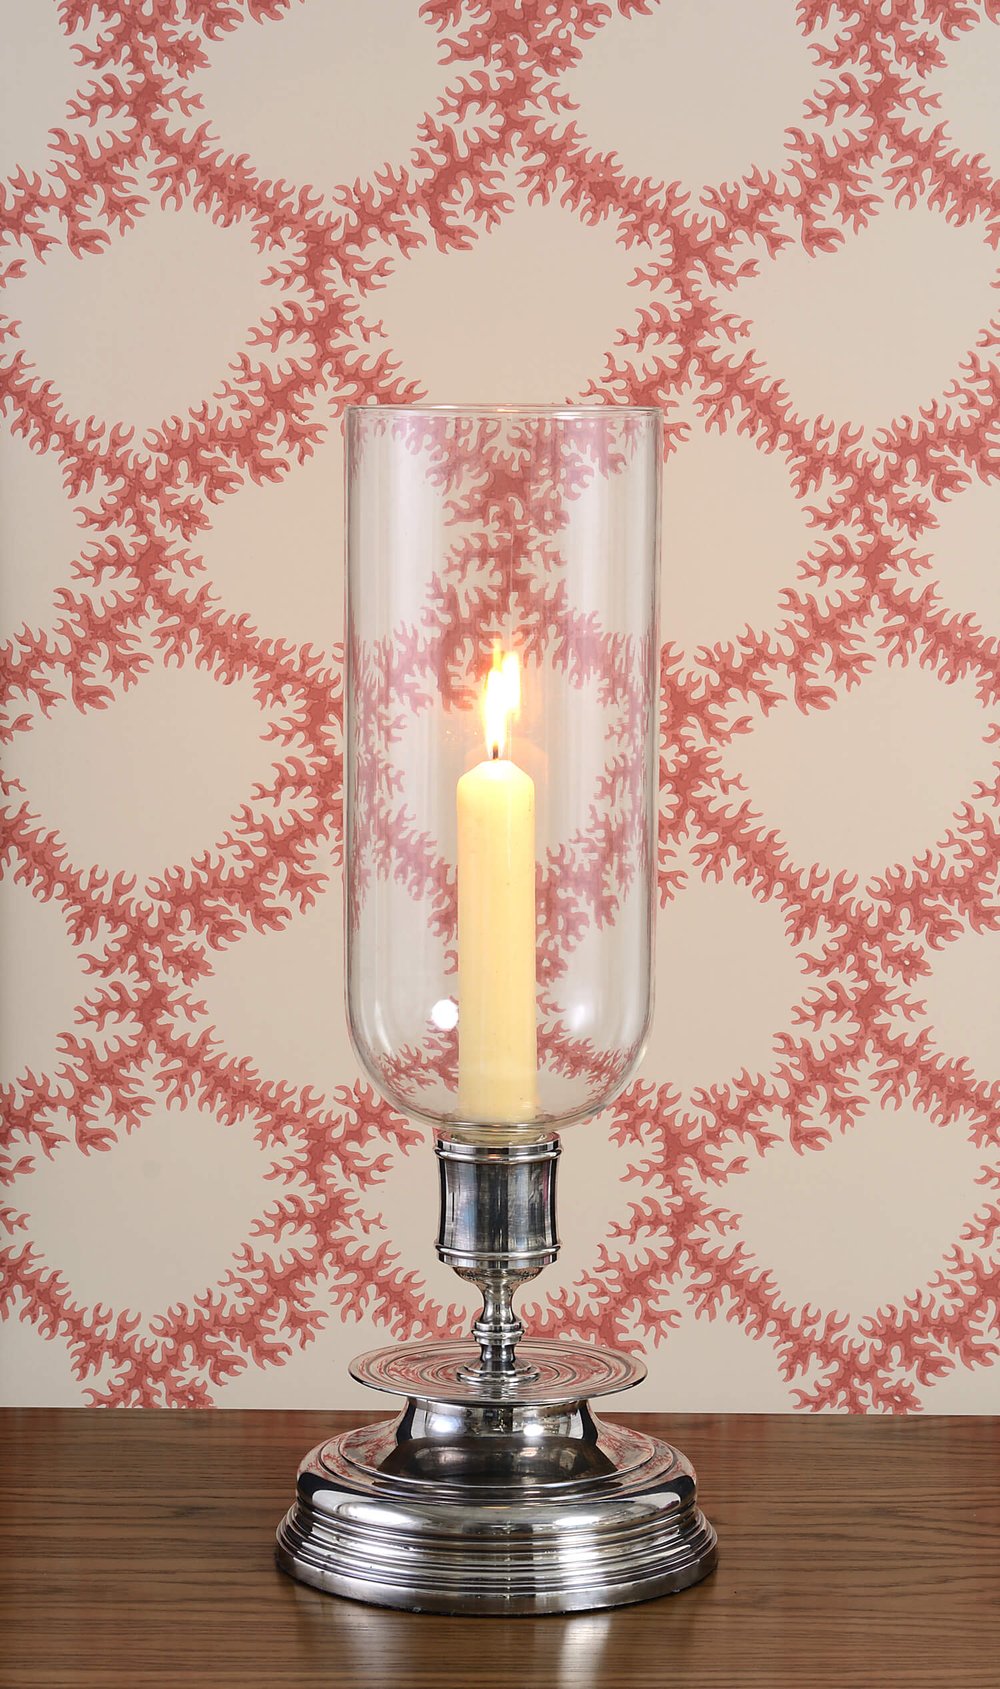 Woven vine wallcovering behind lit hurricane style candlestick.